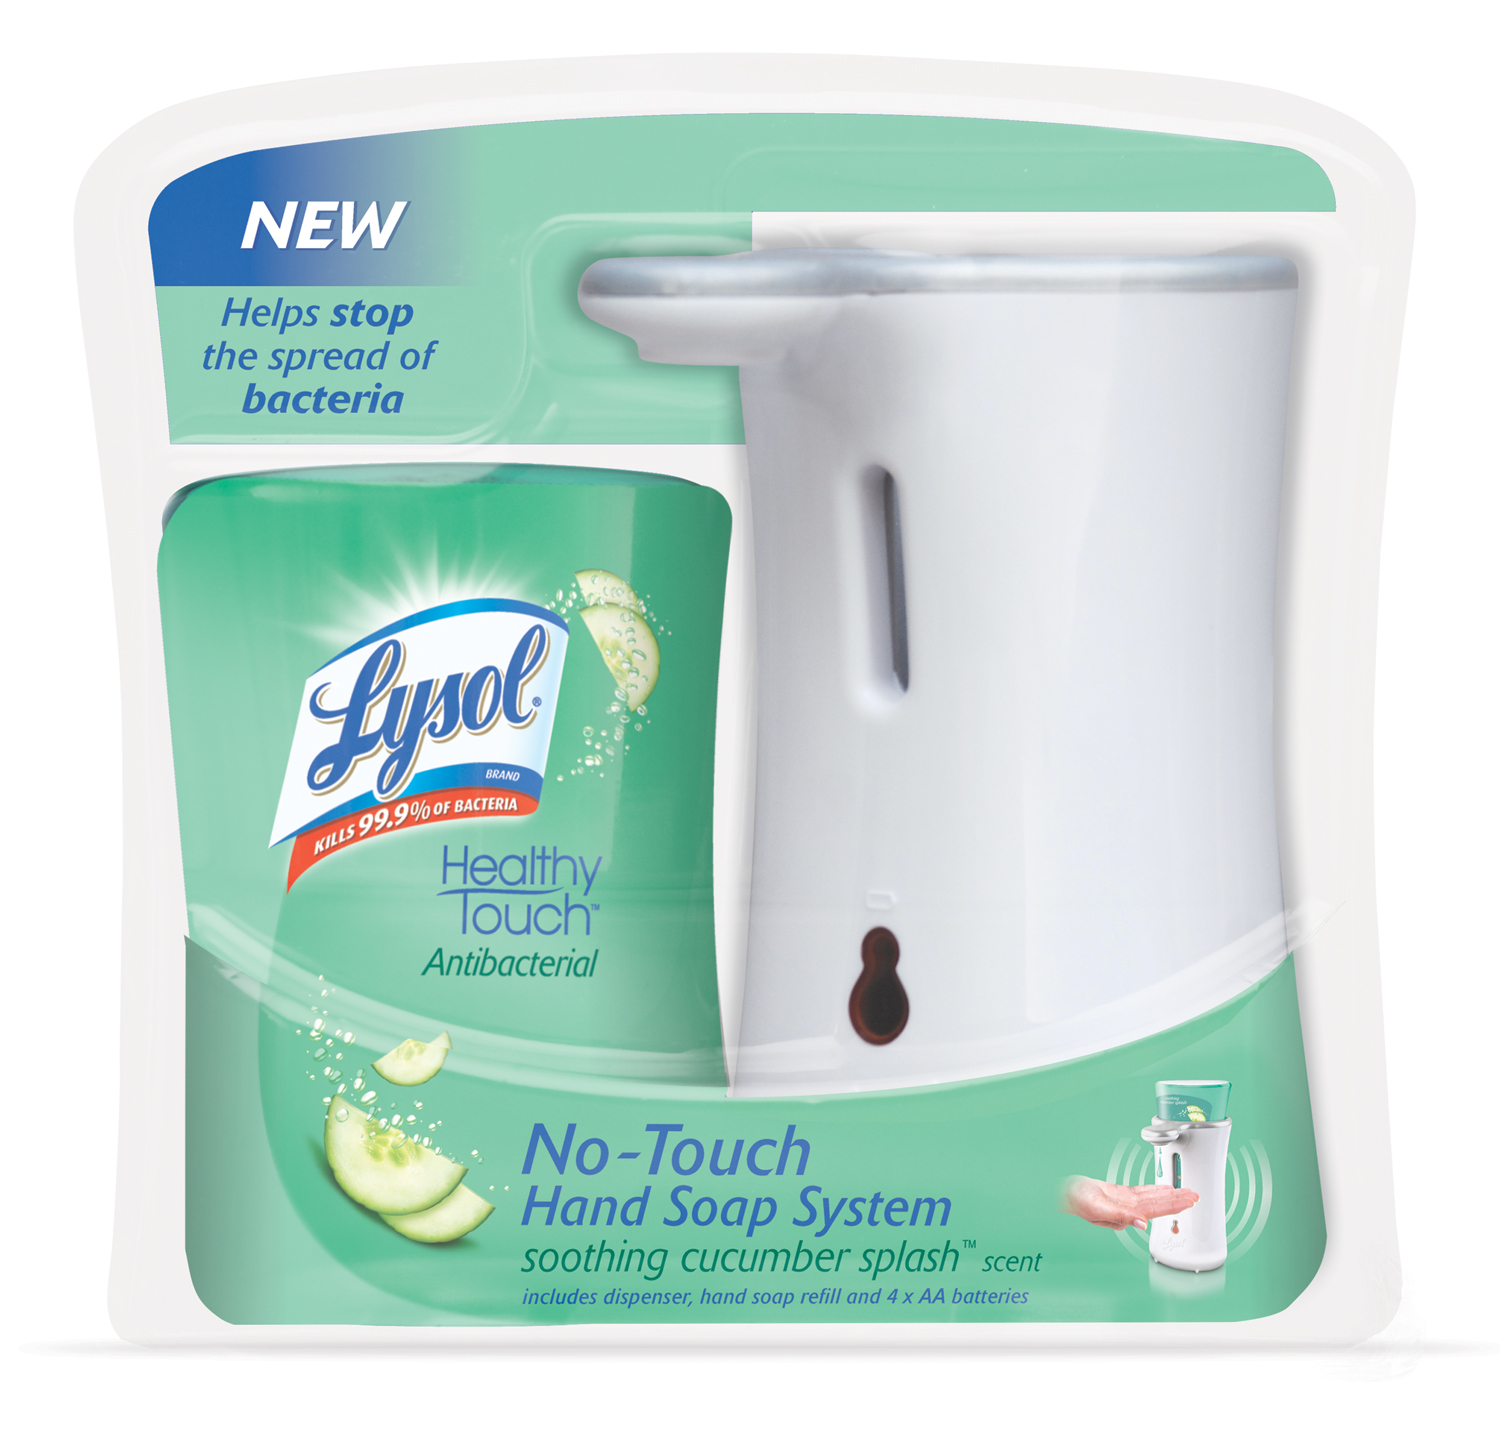 lysol-no-touch-hand-soap-dispenser-only-0-97